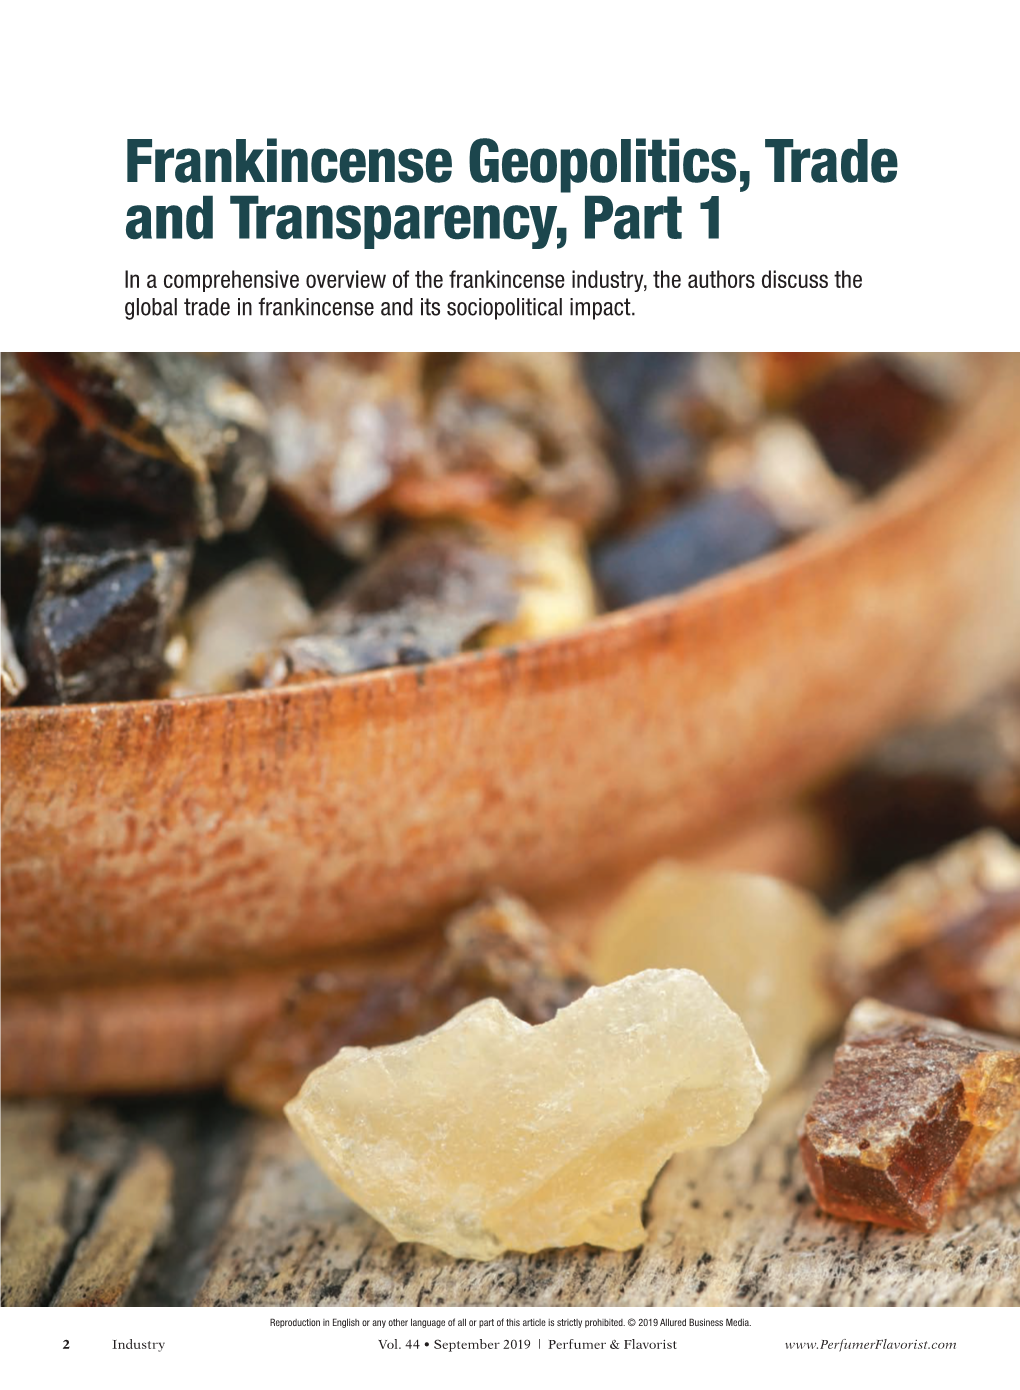 Frankincense Geopolitics, Trade and Transparency, Part 1